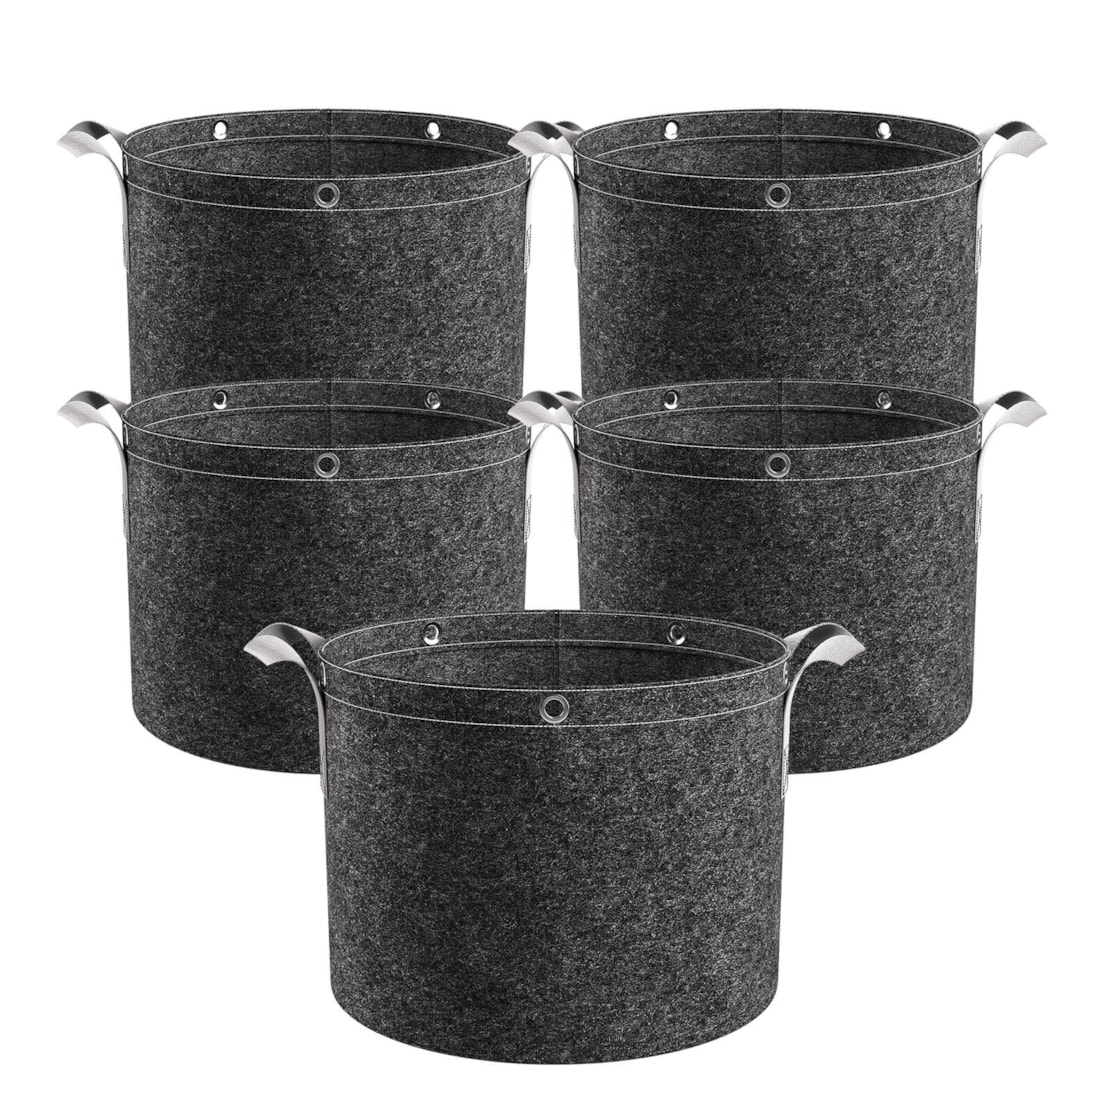 VIVOSUN 25 Gallon Grow Bags 5-Pack Black Thickened Nonwoven Fabric Pots with Handles, Multi-Purpose Rings